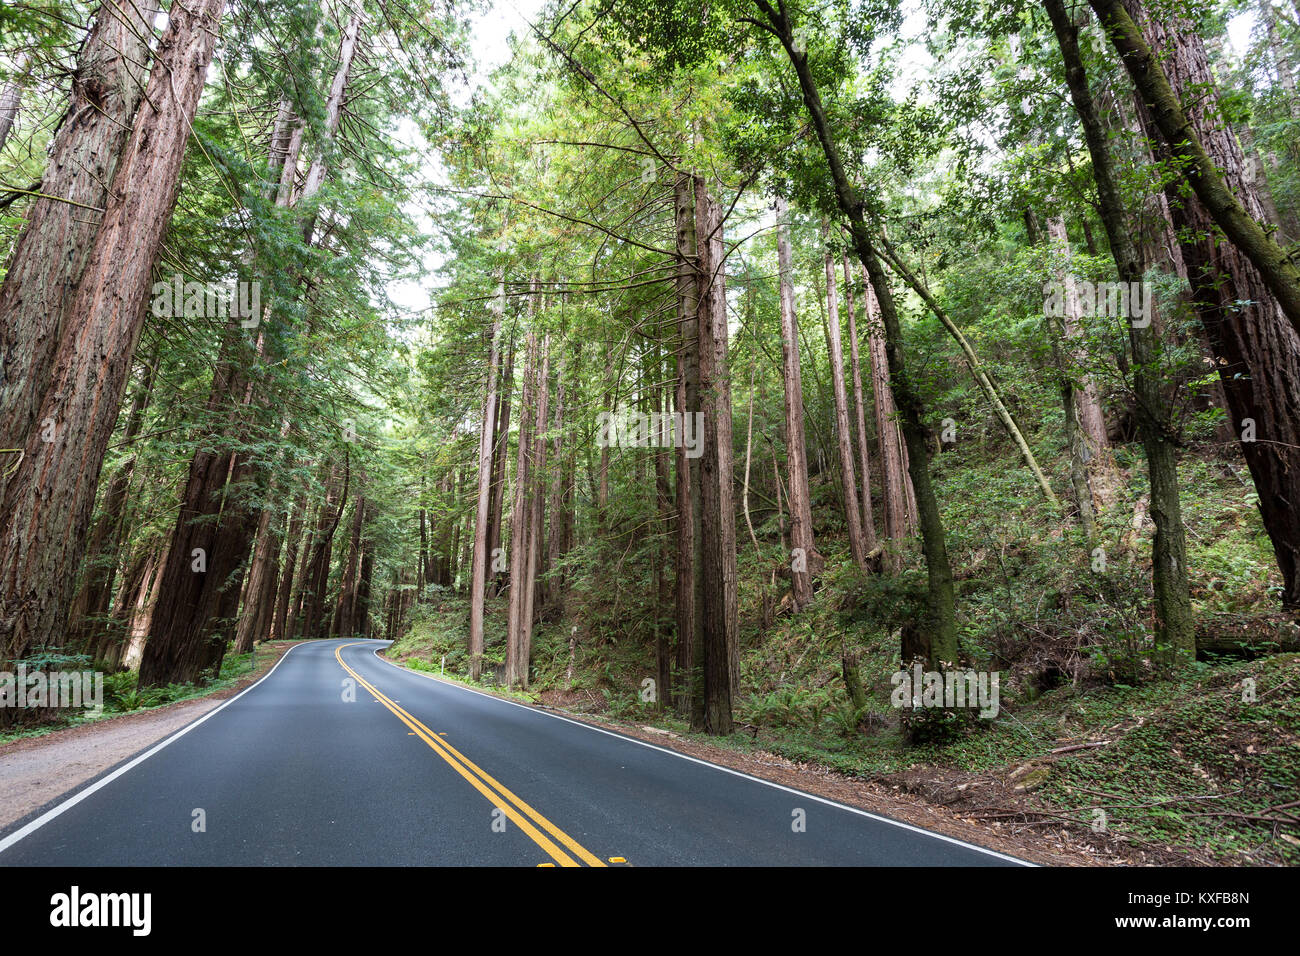 State Route 128 winds through tall trees, including Redwood trees, in Mendocino County, California. Stock Photo